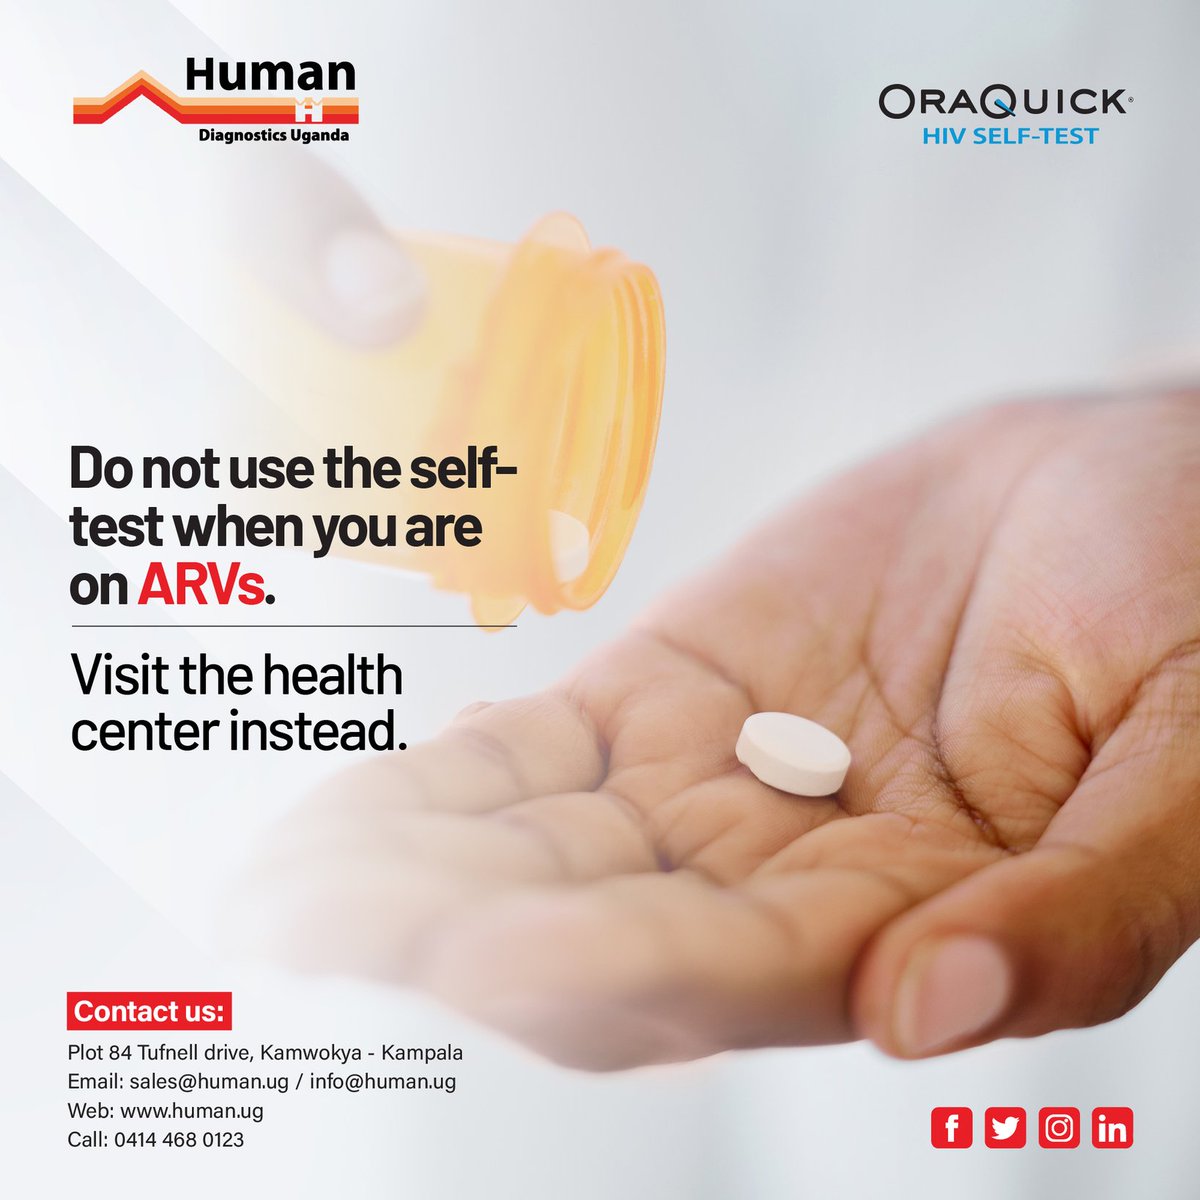 #WisdomWednesday
Keep your health in check! Visit the nearest health center as soon as you test positive for HIV. 
#endHIVstigma 
#knowYourHIVstatus
#OraQuickHIVSelfTest